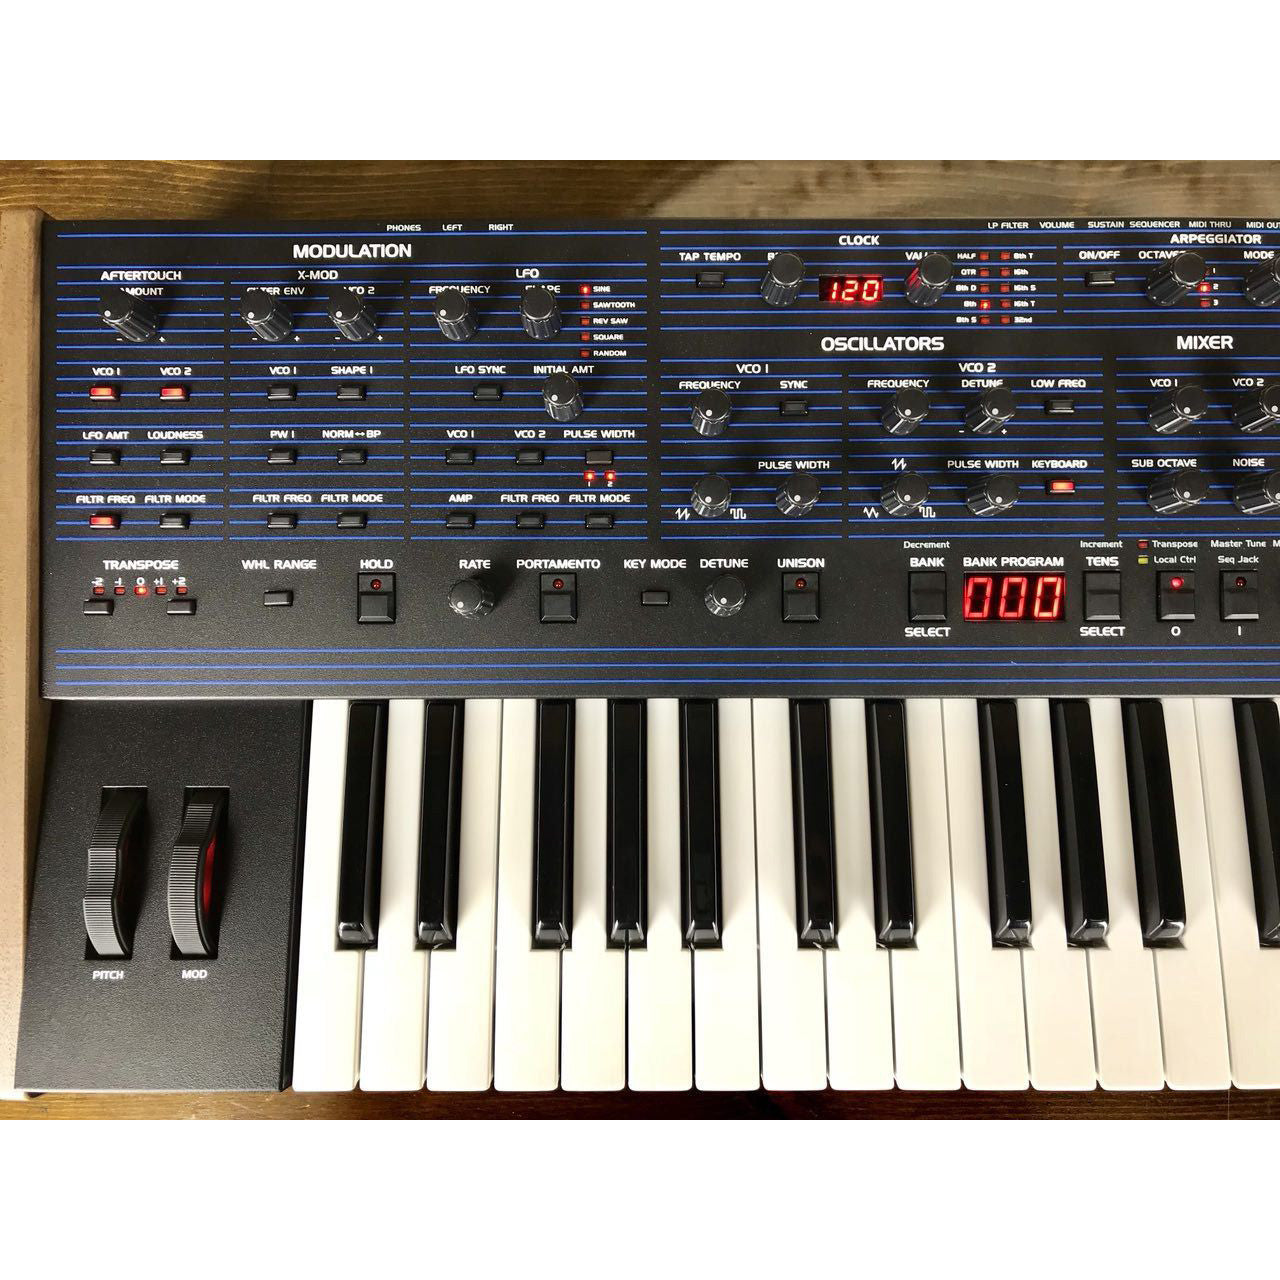 SEQUENTIAL OB-6 Keyboard